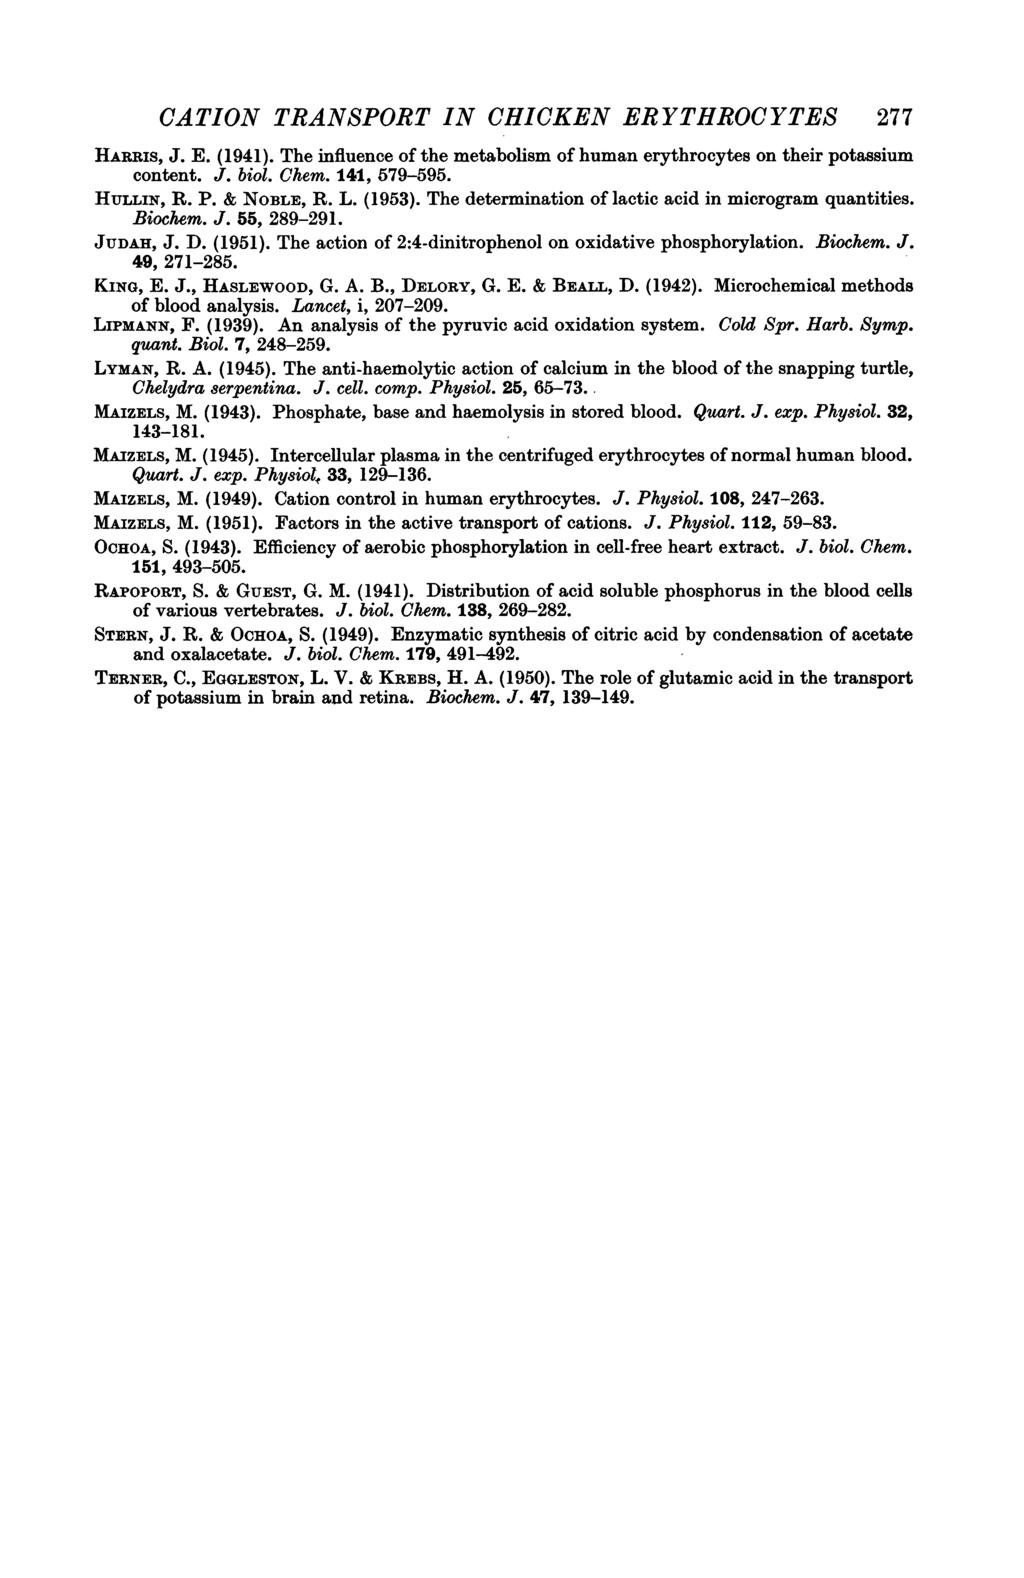 CATION TRANSPORT IN CHICKEN ERYTHROCYTES 277 HARaIS, J. E. (1941). The influence of the metabolism of human erythrocytes on their potassium content. J. biol. Chem. 141, 579-595. HuLLiN, R. P.